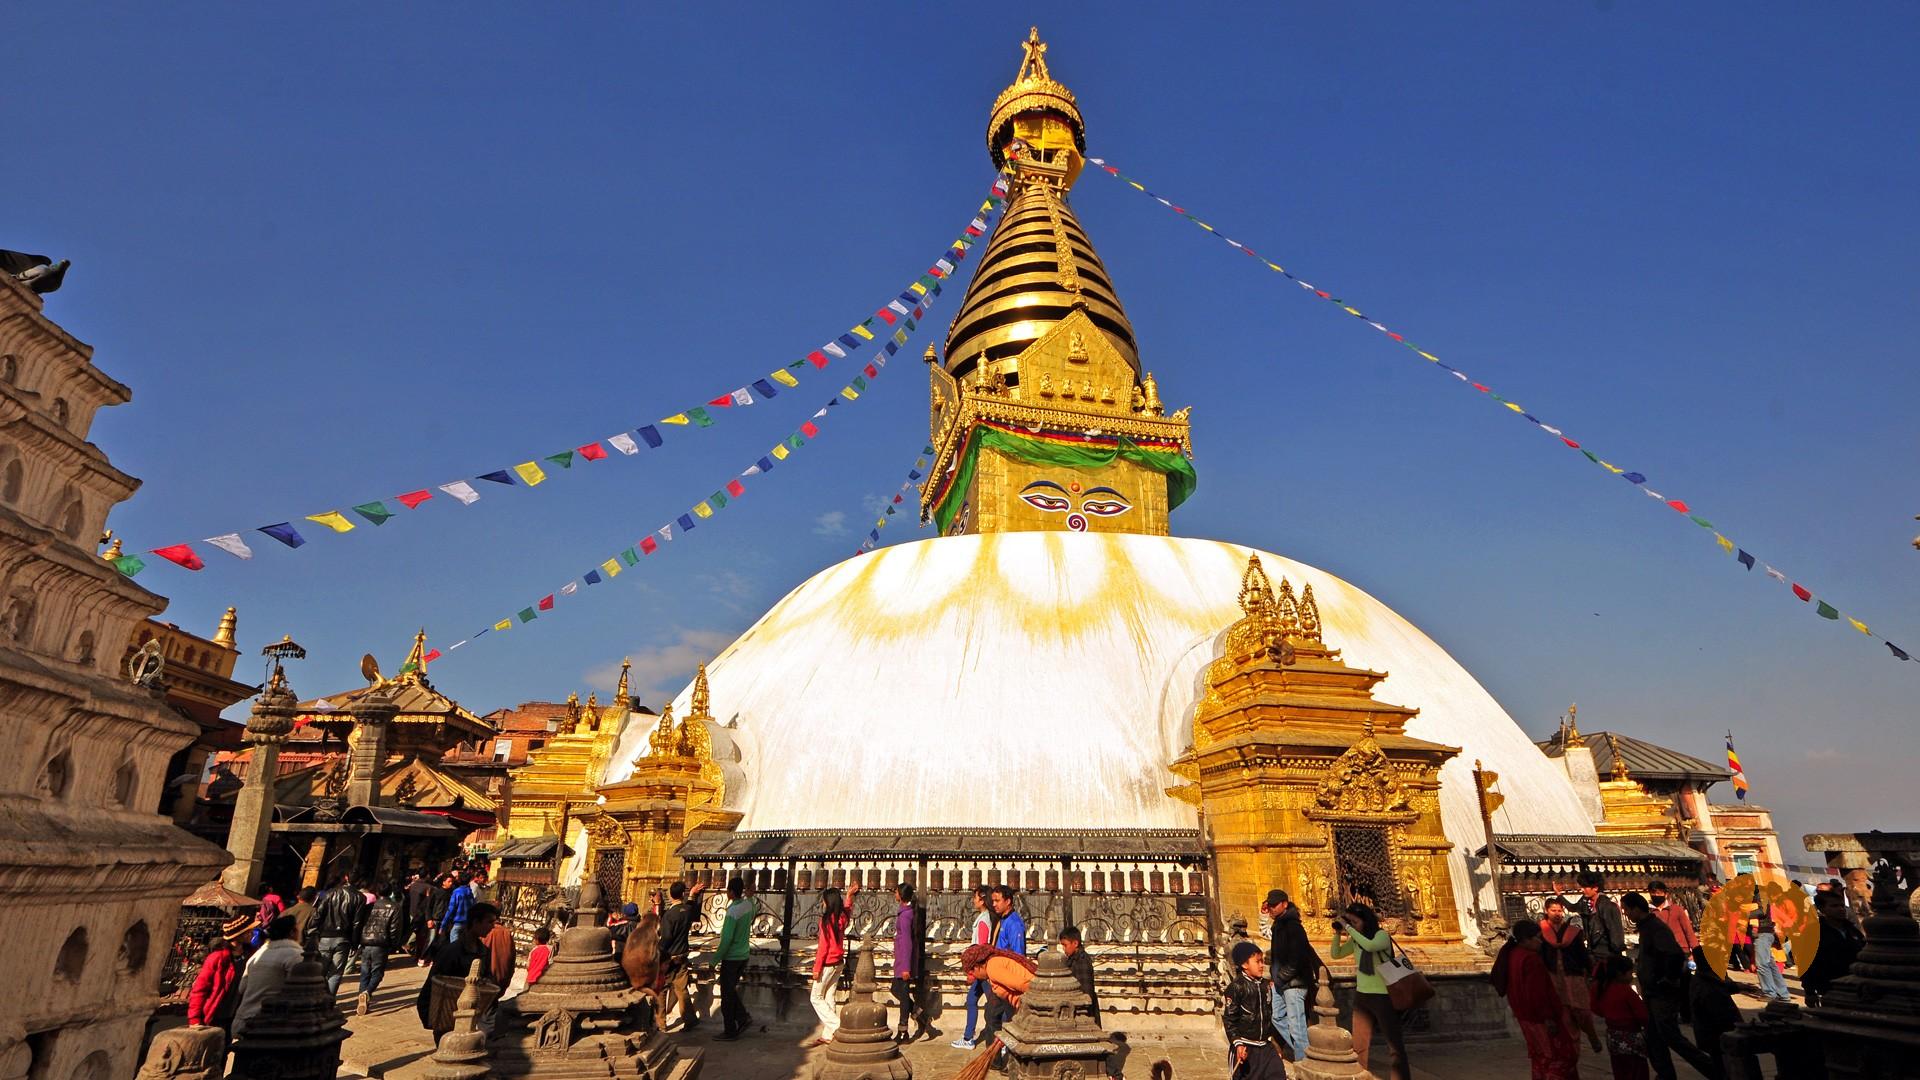 NEPAL TOUR PACKAGES FROM KATHMANDU